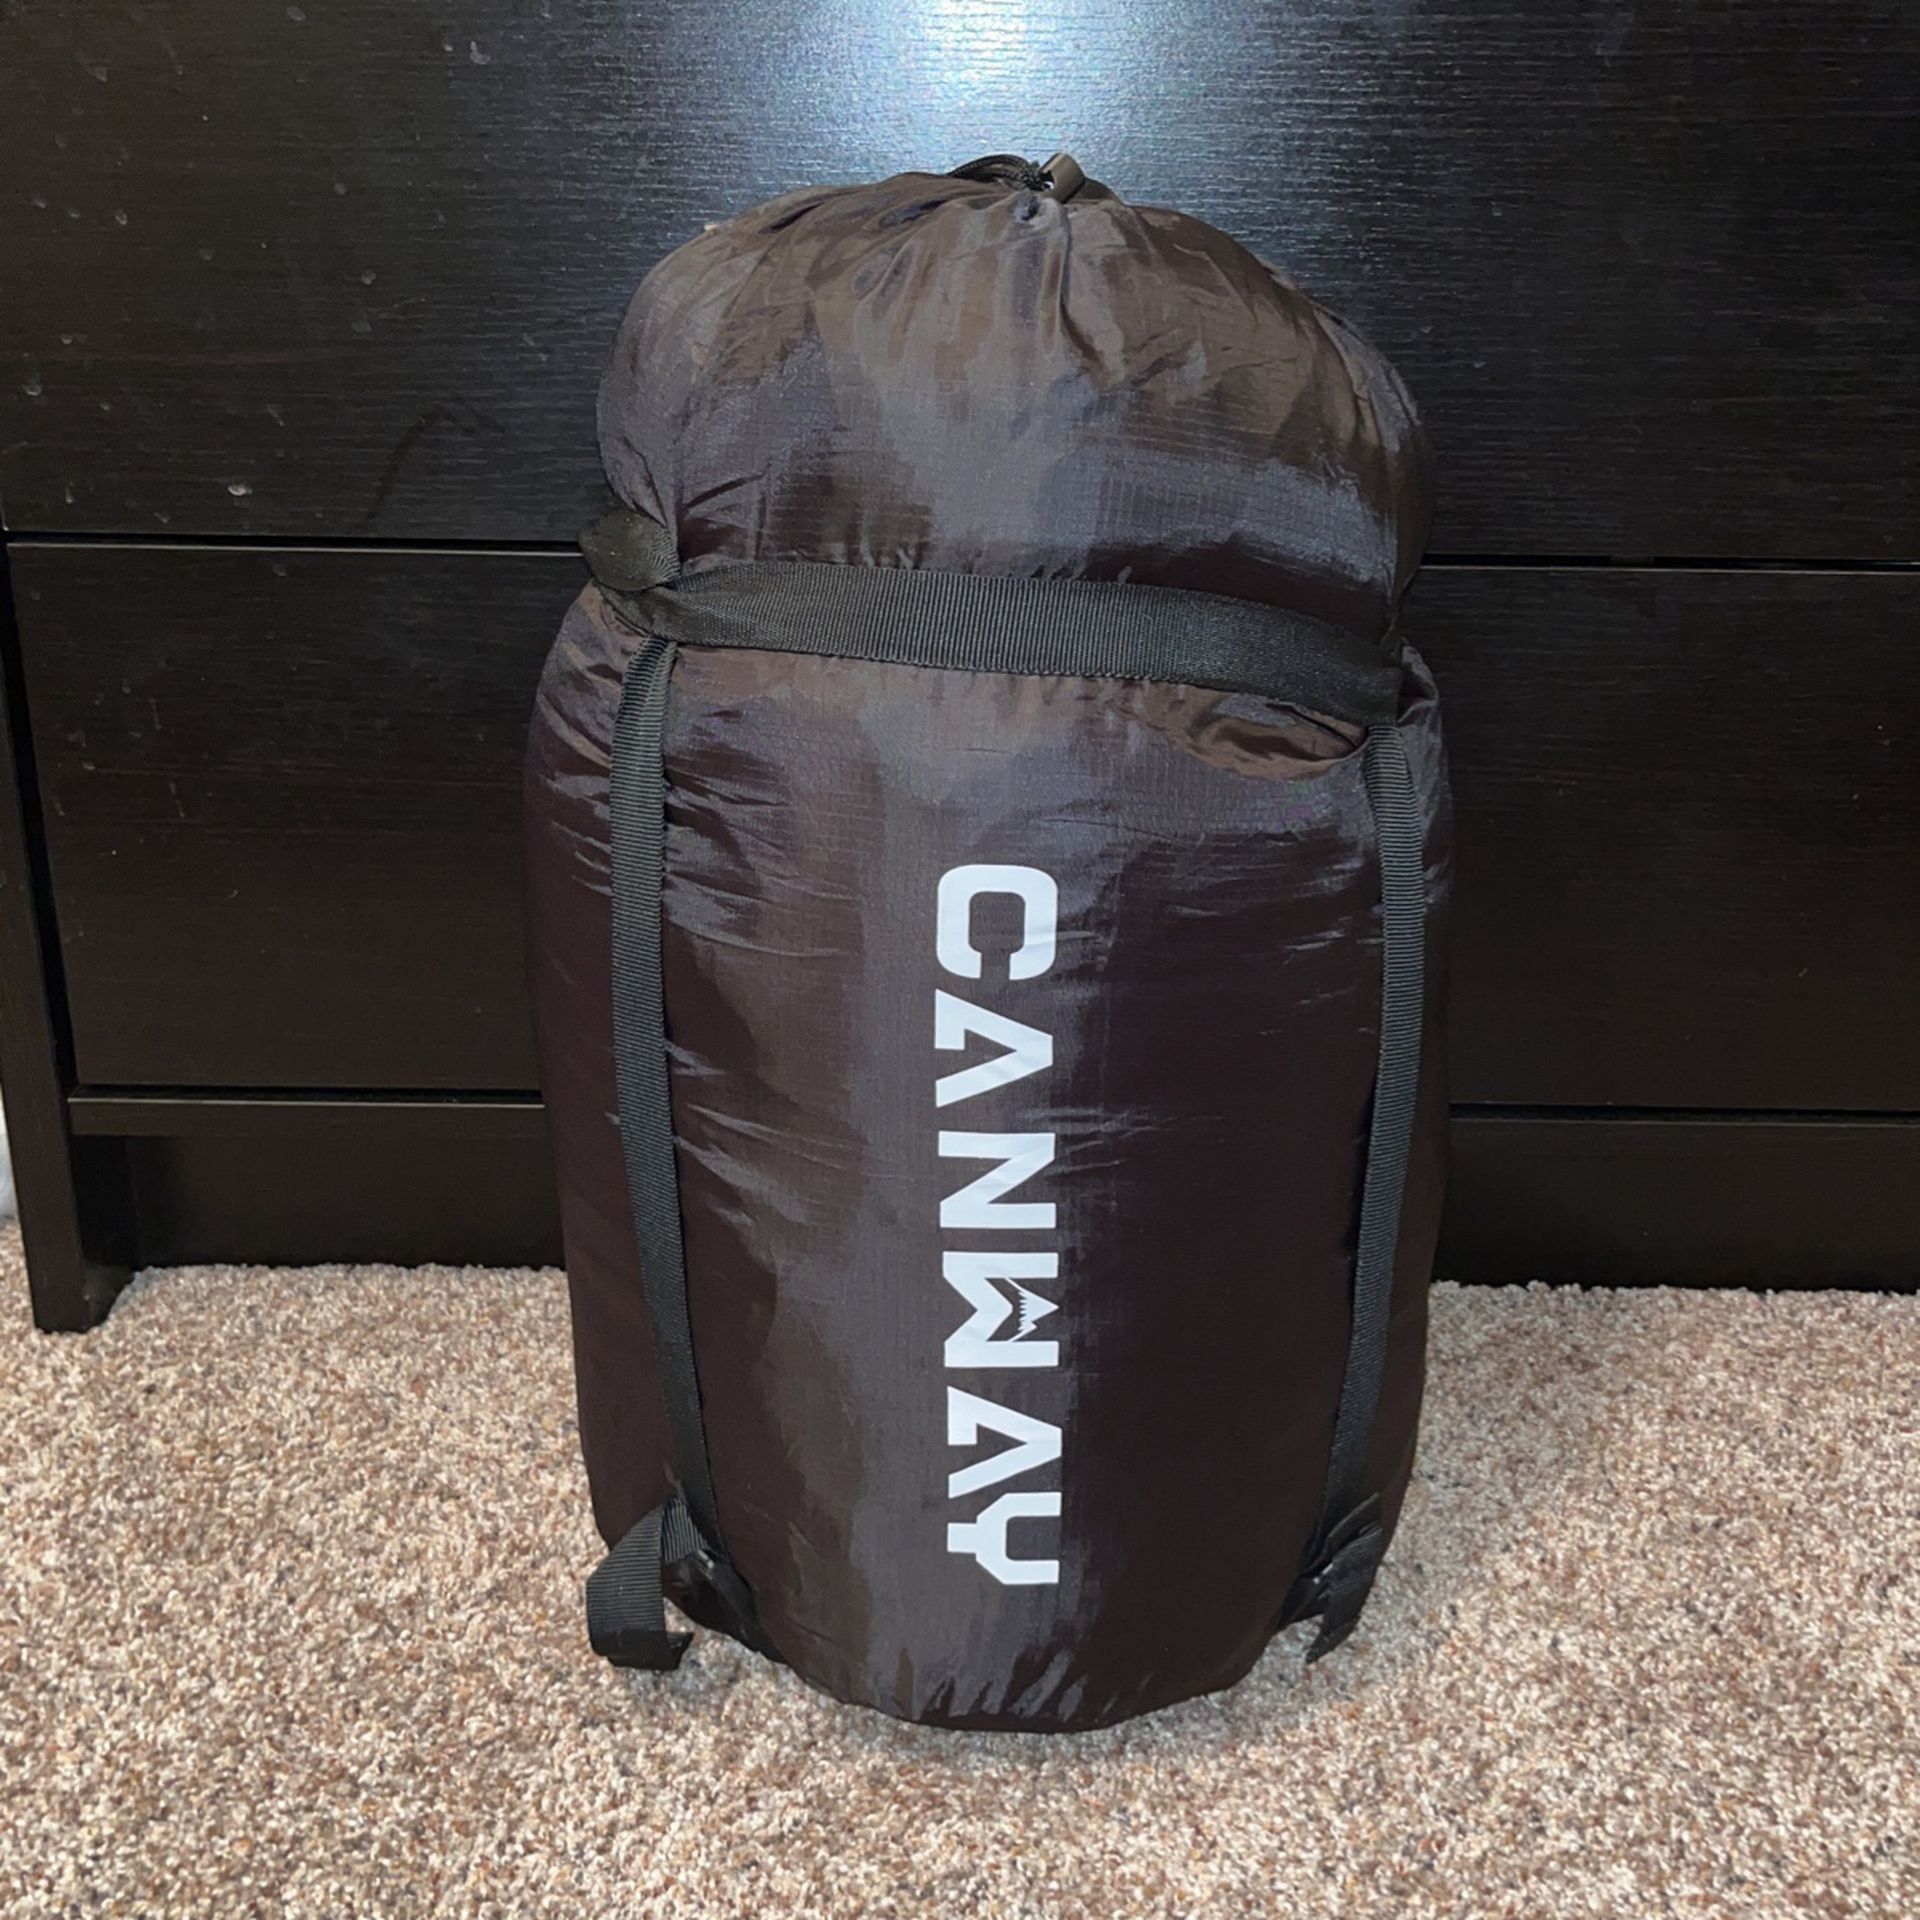 Canway Queen Sized Sleeping Bag Black And Grey